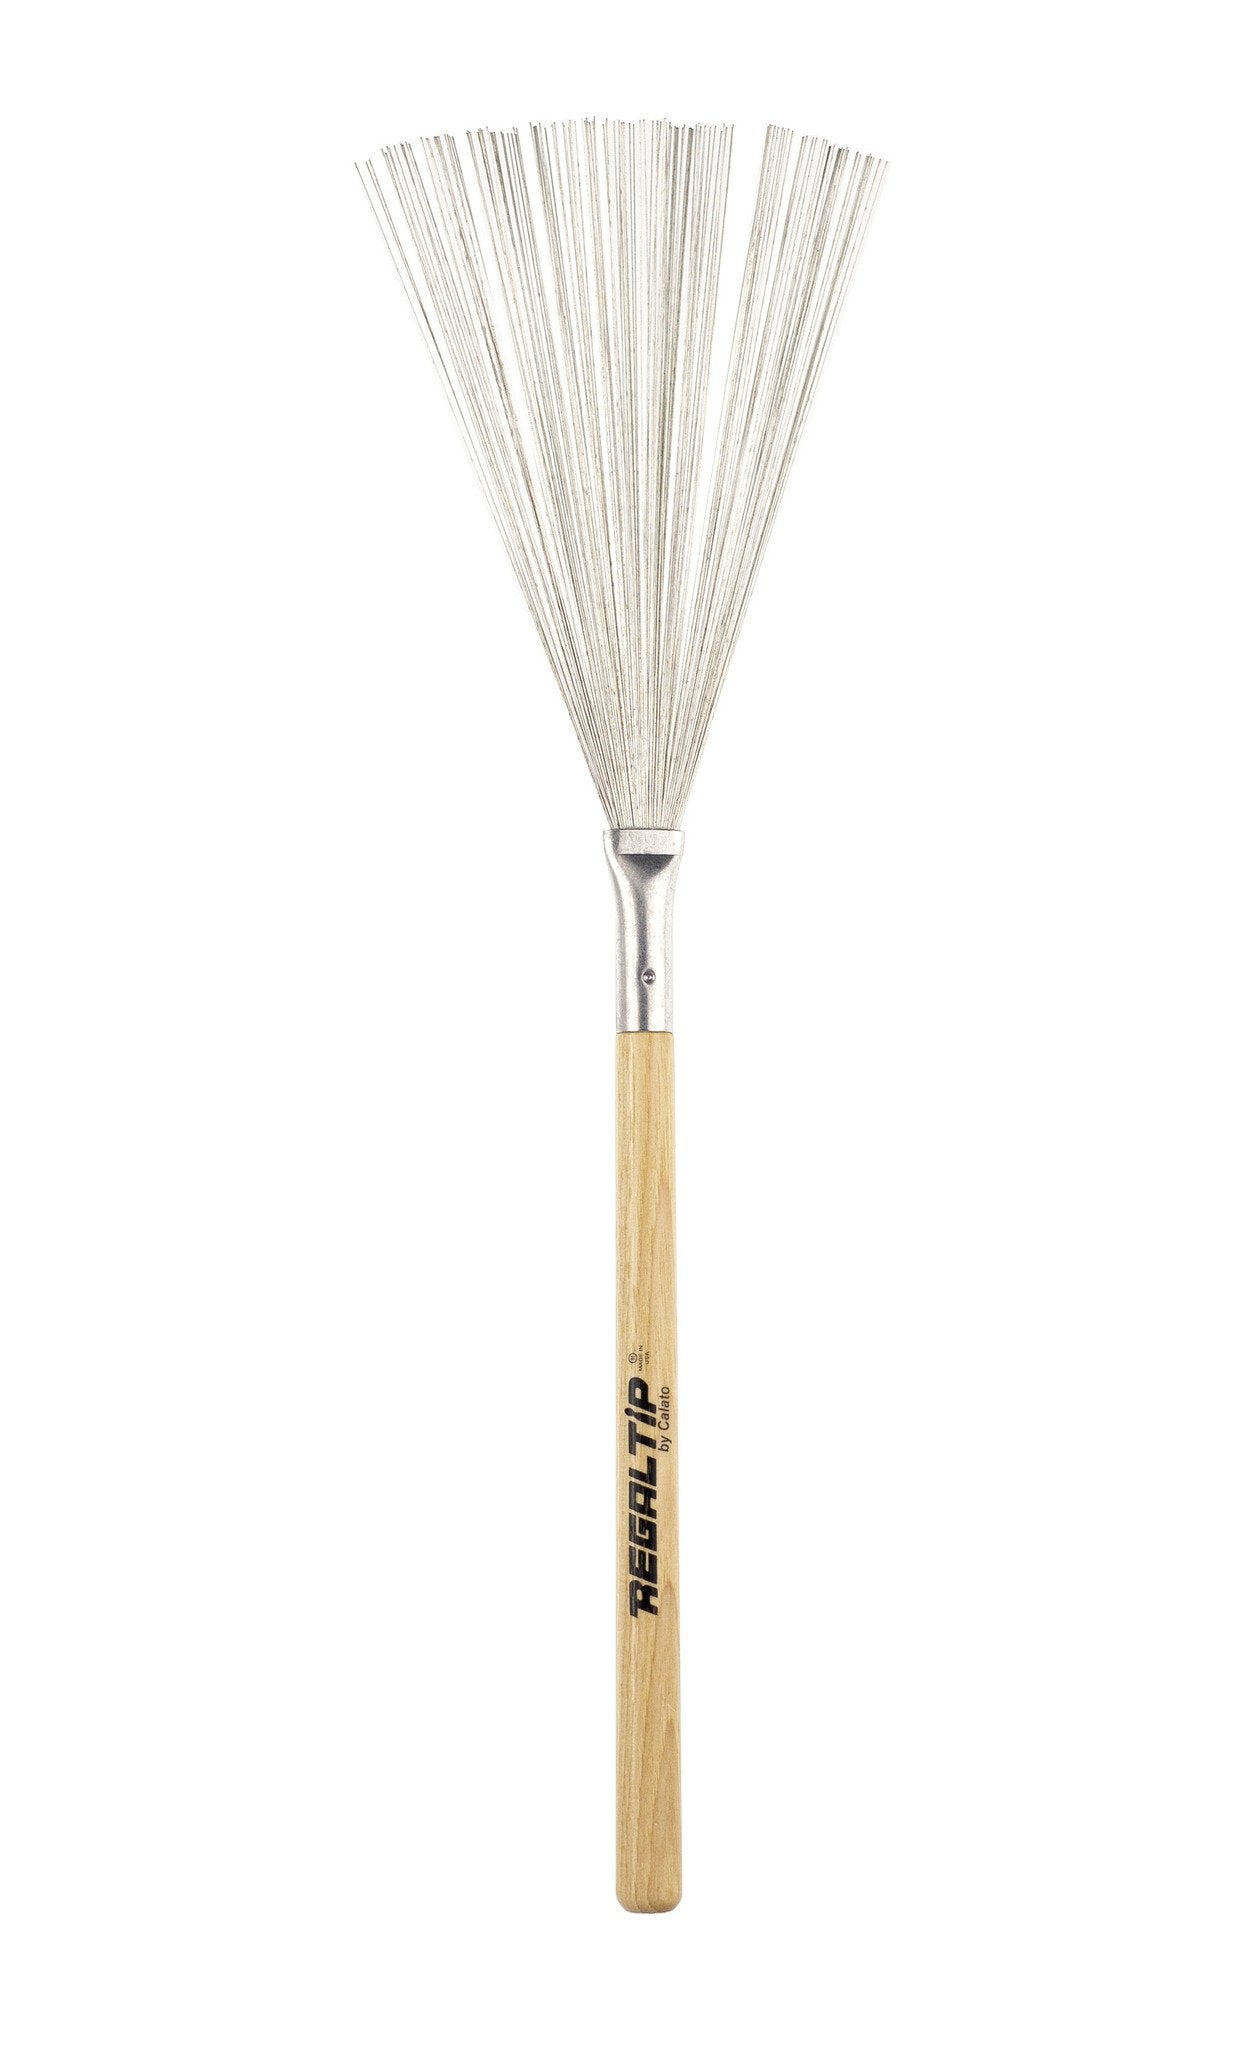 Regal Tip Hickory Handle Brushes